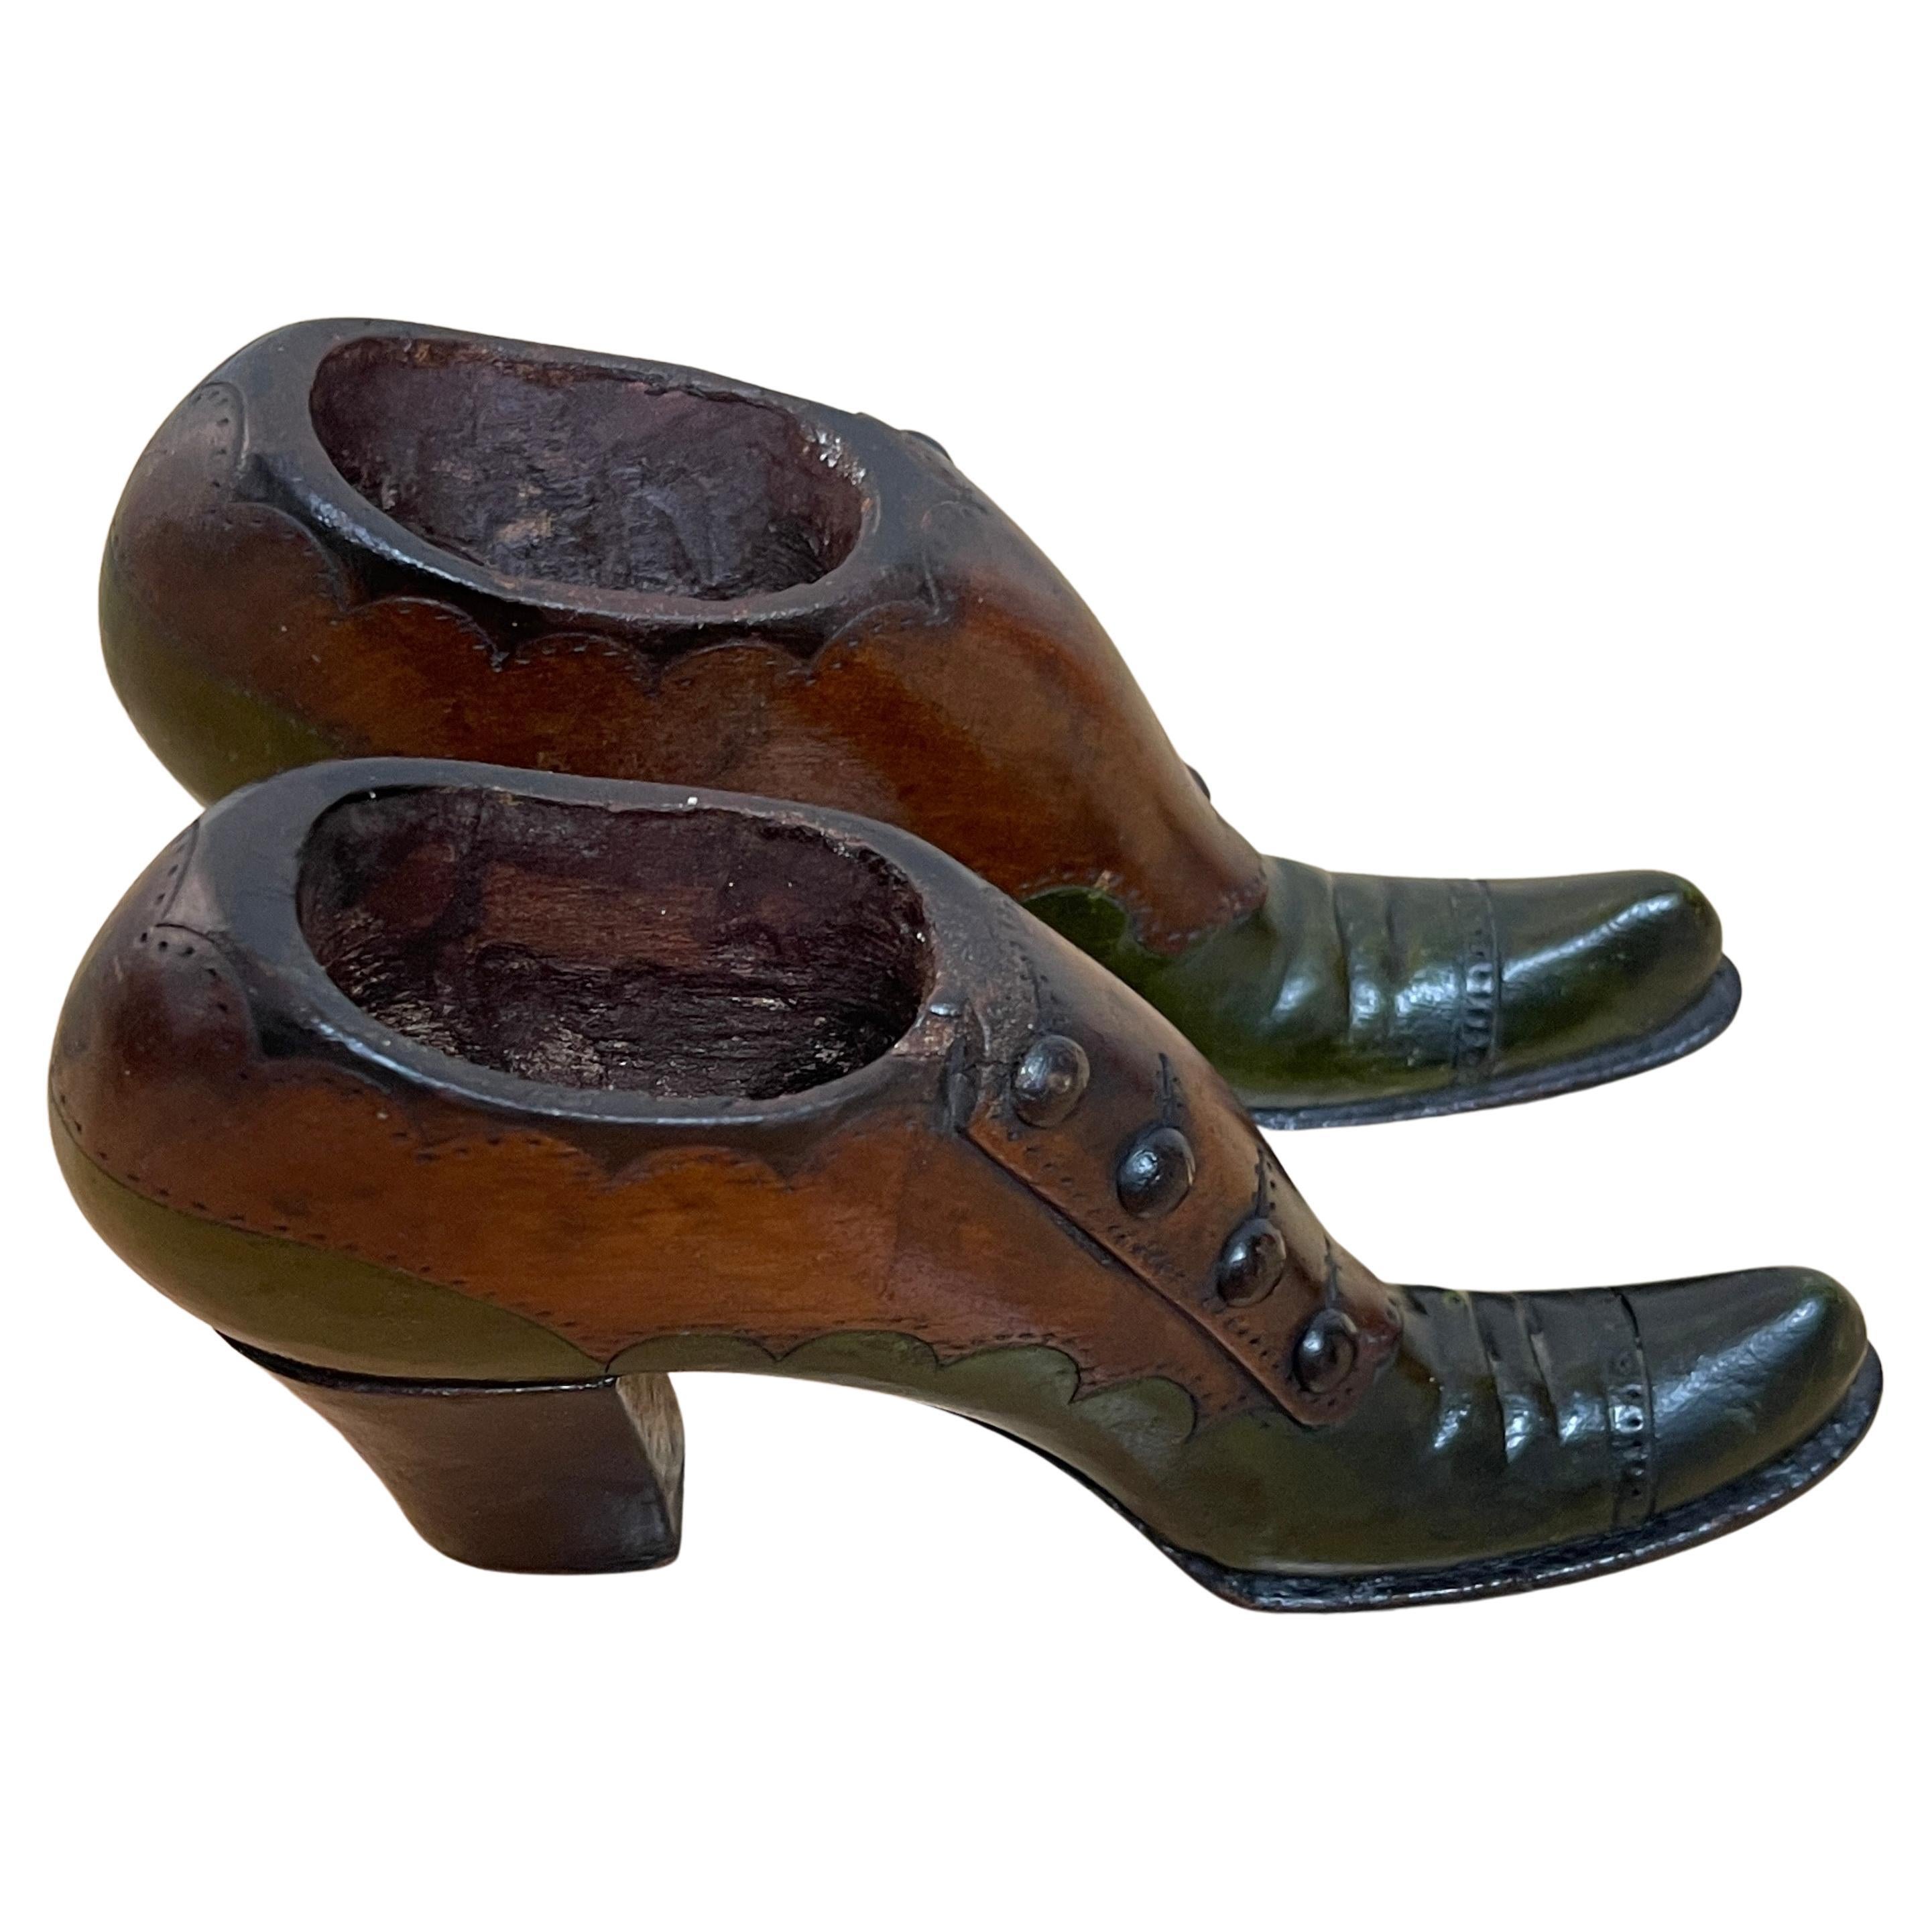 Pair of English Regency carved hardwood Salesman samples/models of leather boots.
England, Circa 1820s

A remarkable intact example of a pair of highly detailed carved hardwood and polychromed salesman samples of leather boots. The fine